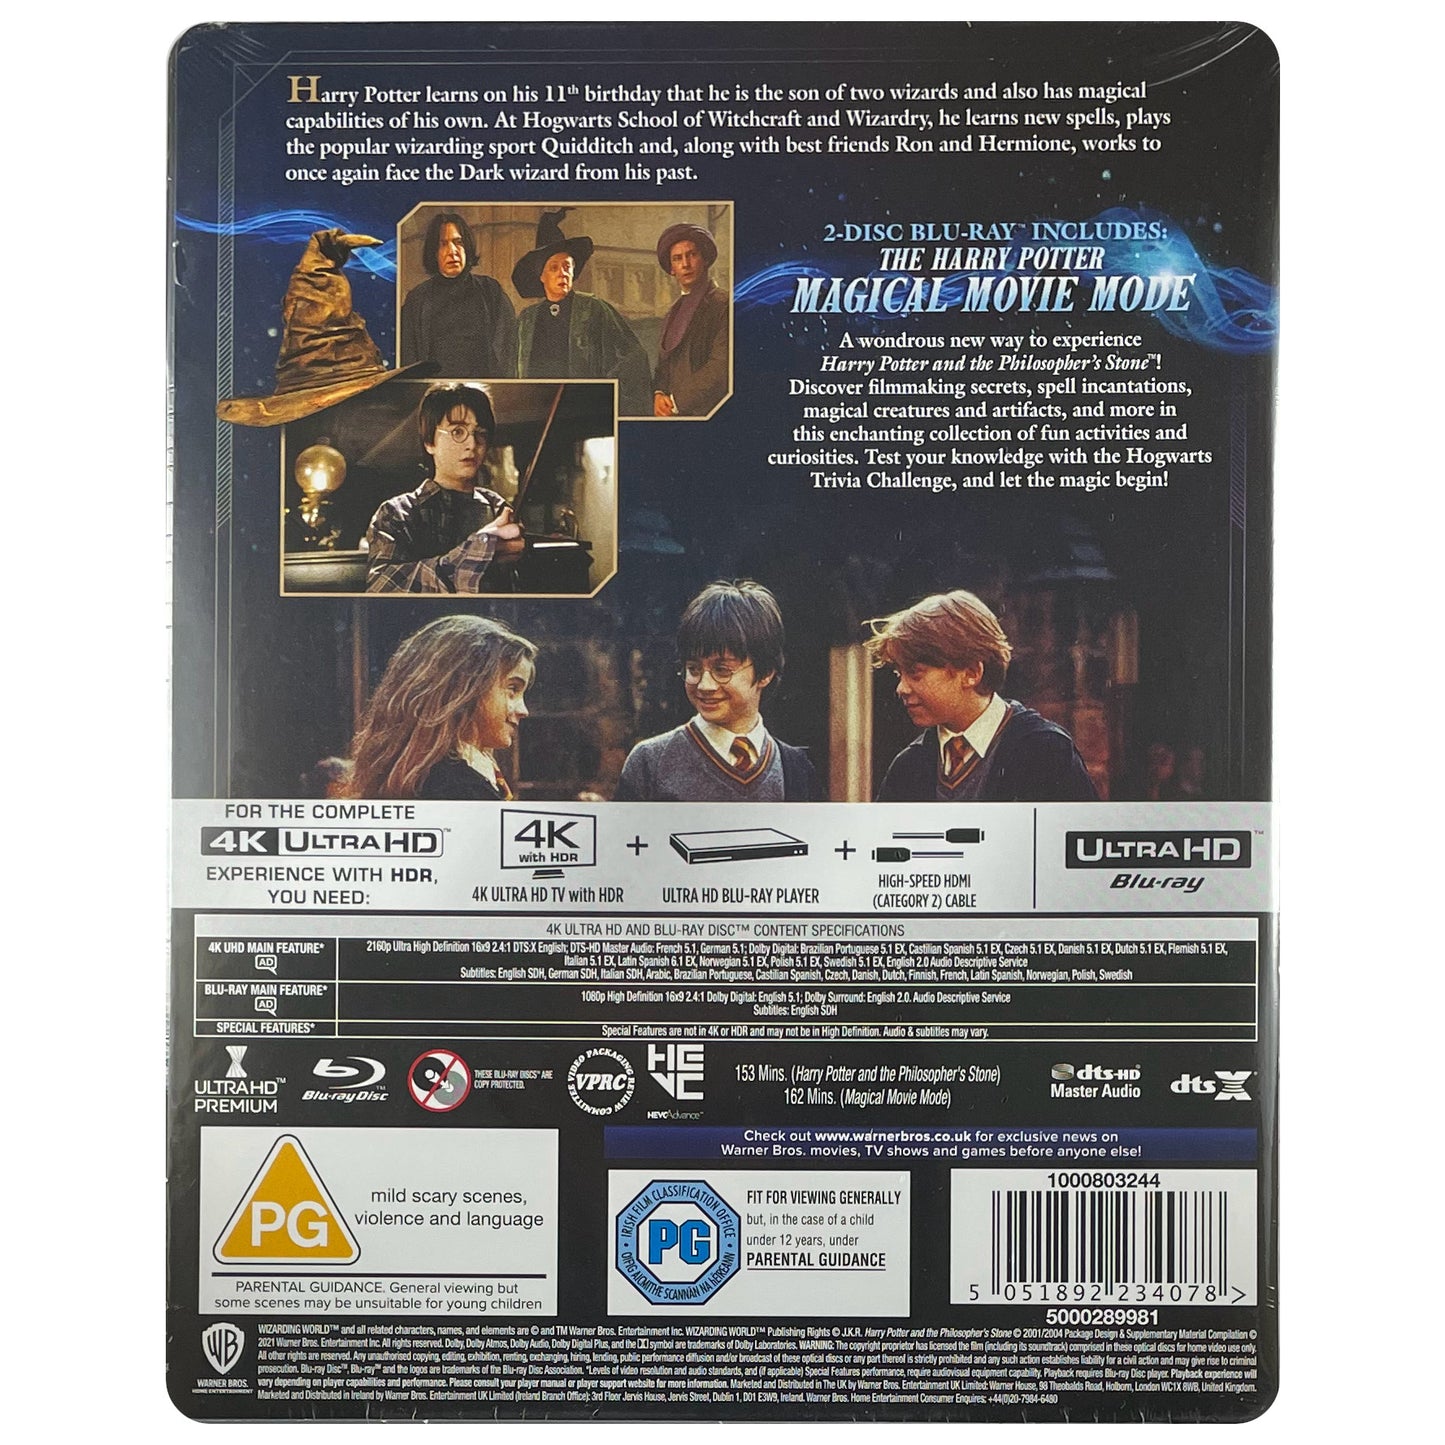 Harry Potter and The Philosopher's Stone 20th Anniversary 4K Steelbook